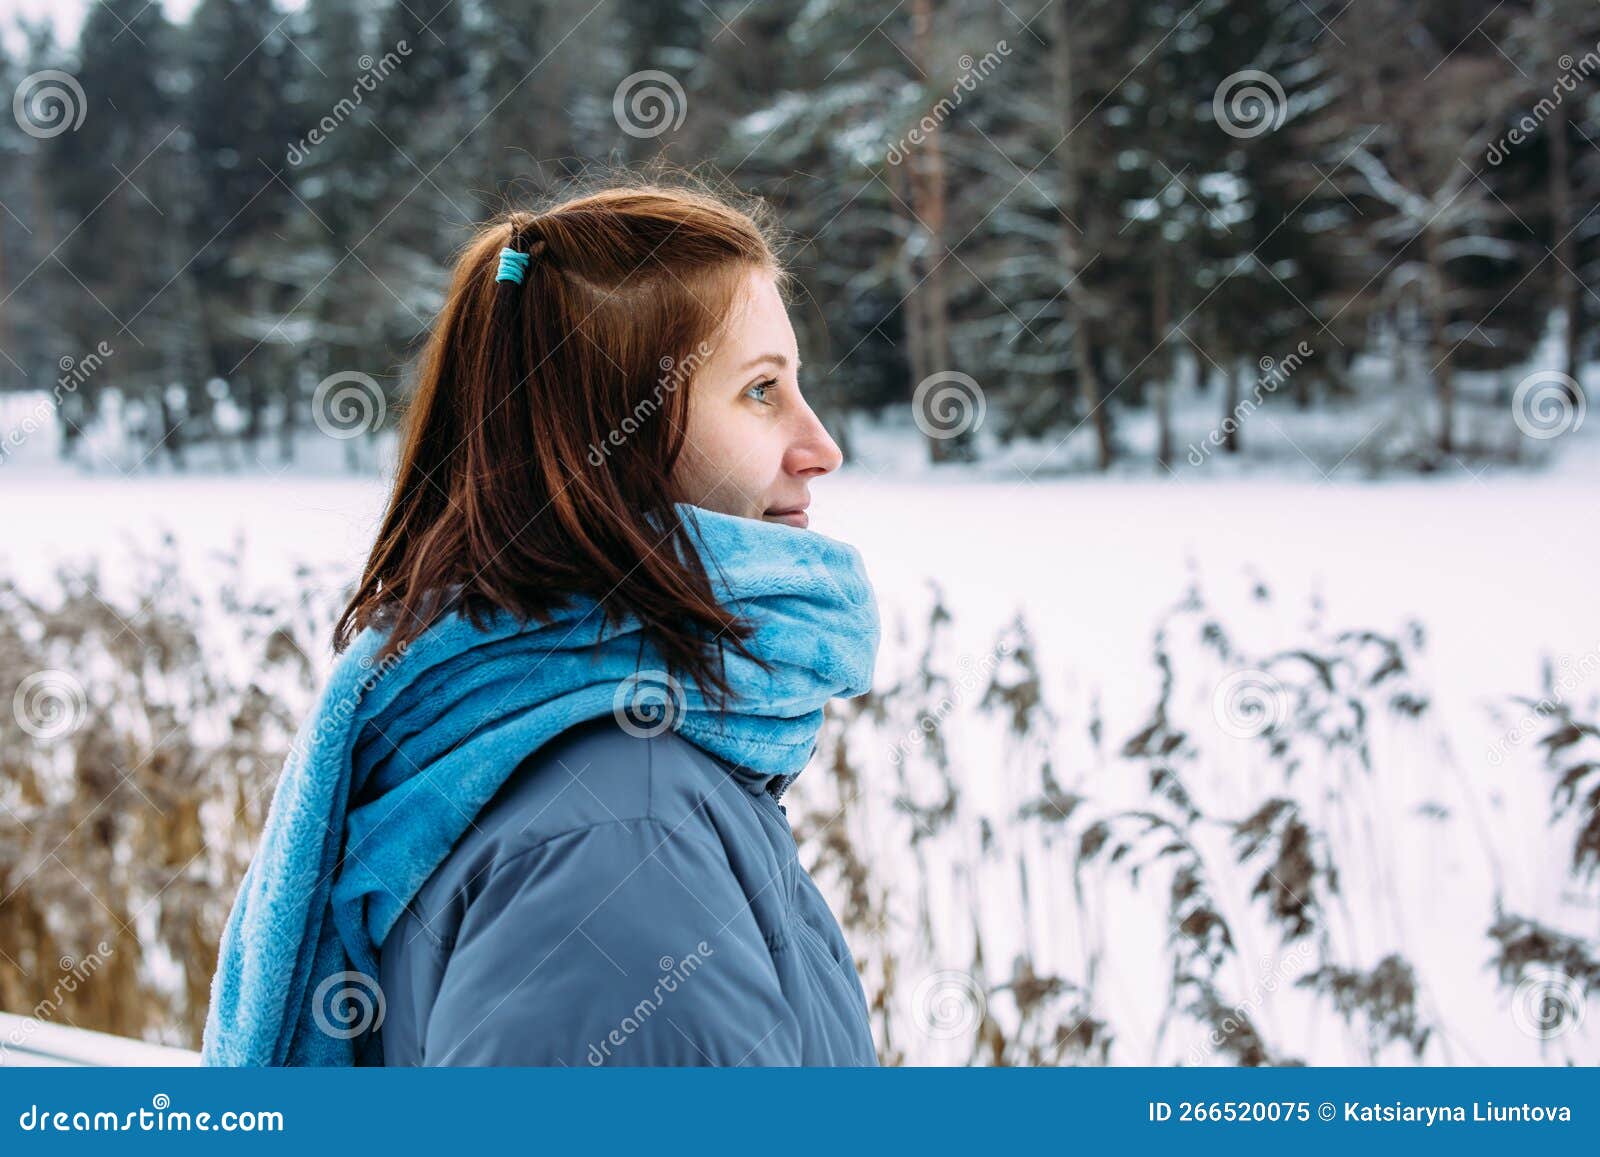 https://thumbs.dreamstime.com/z/portrait-woman-winter-clothes-nature-there-lot-snow-around-266520075.jpg